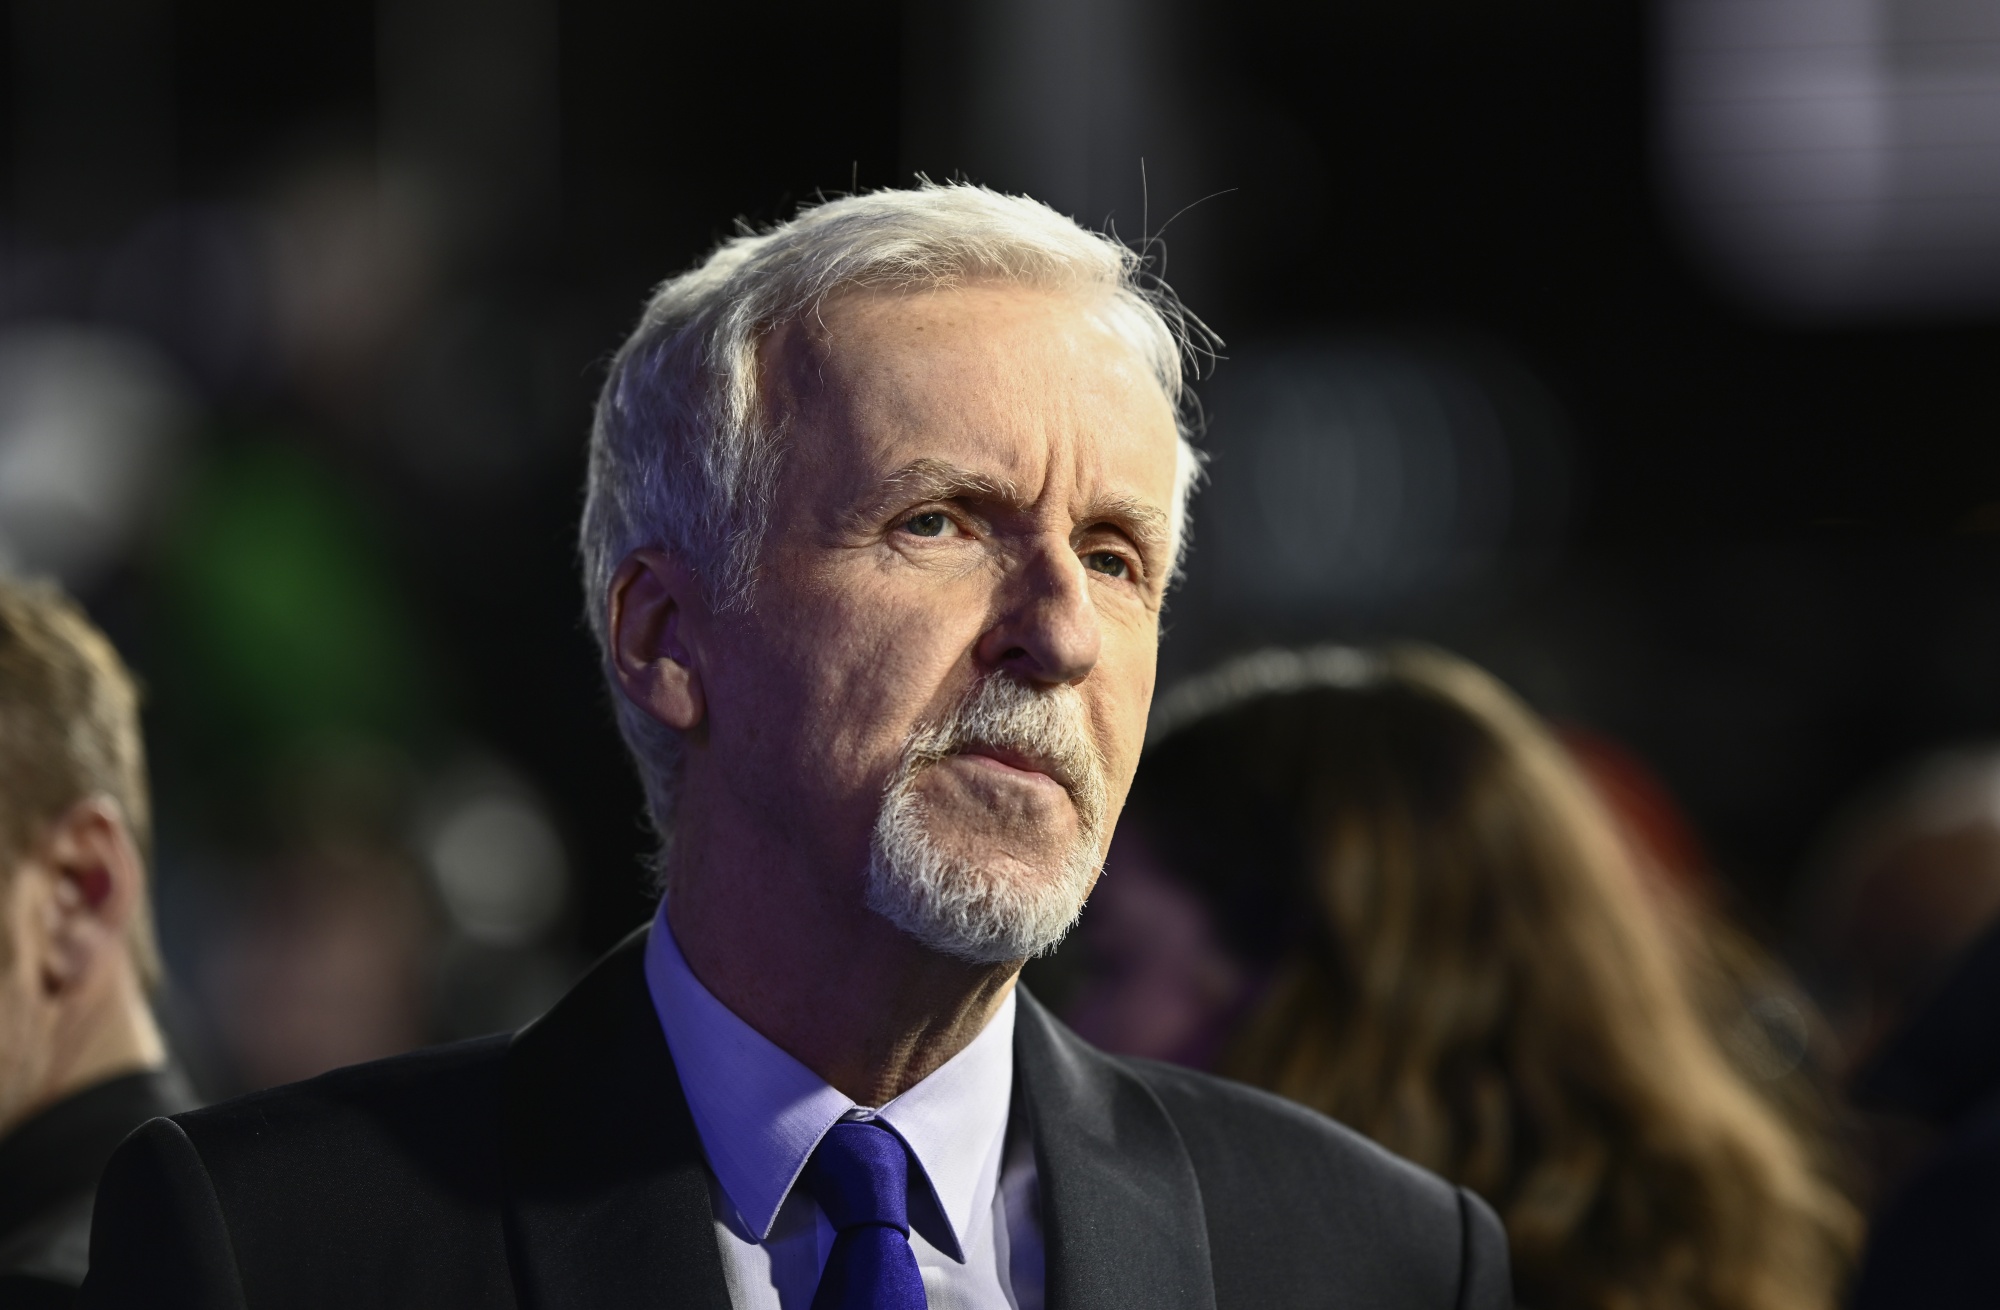 James Cameron talks about the pressures of being a filmmaker